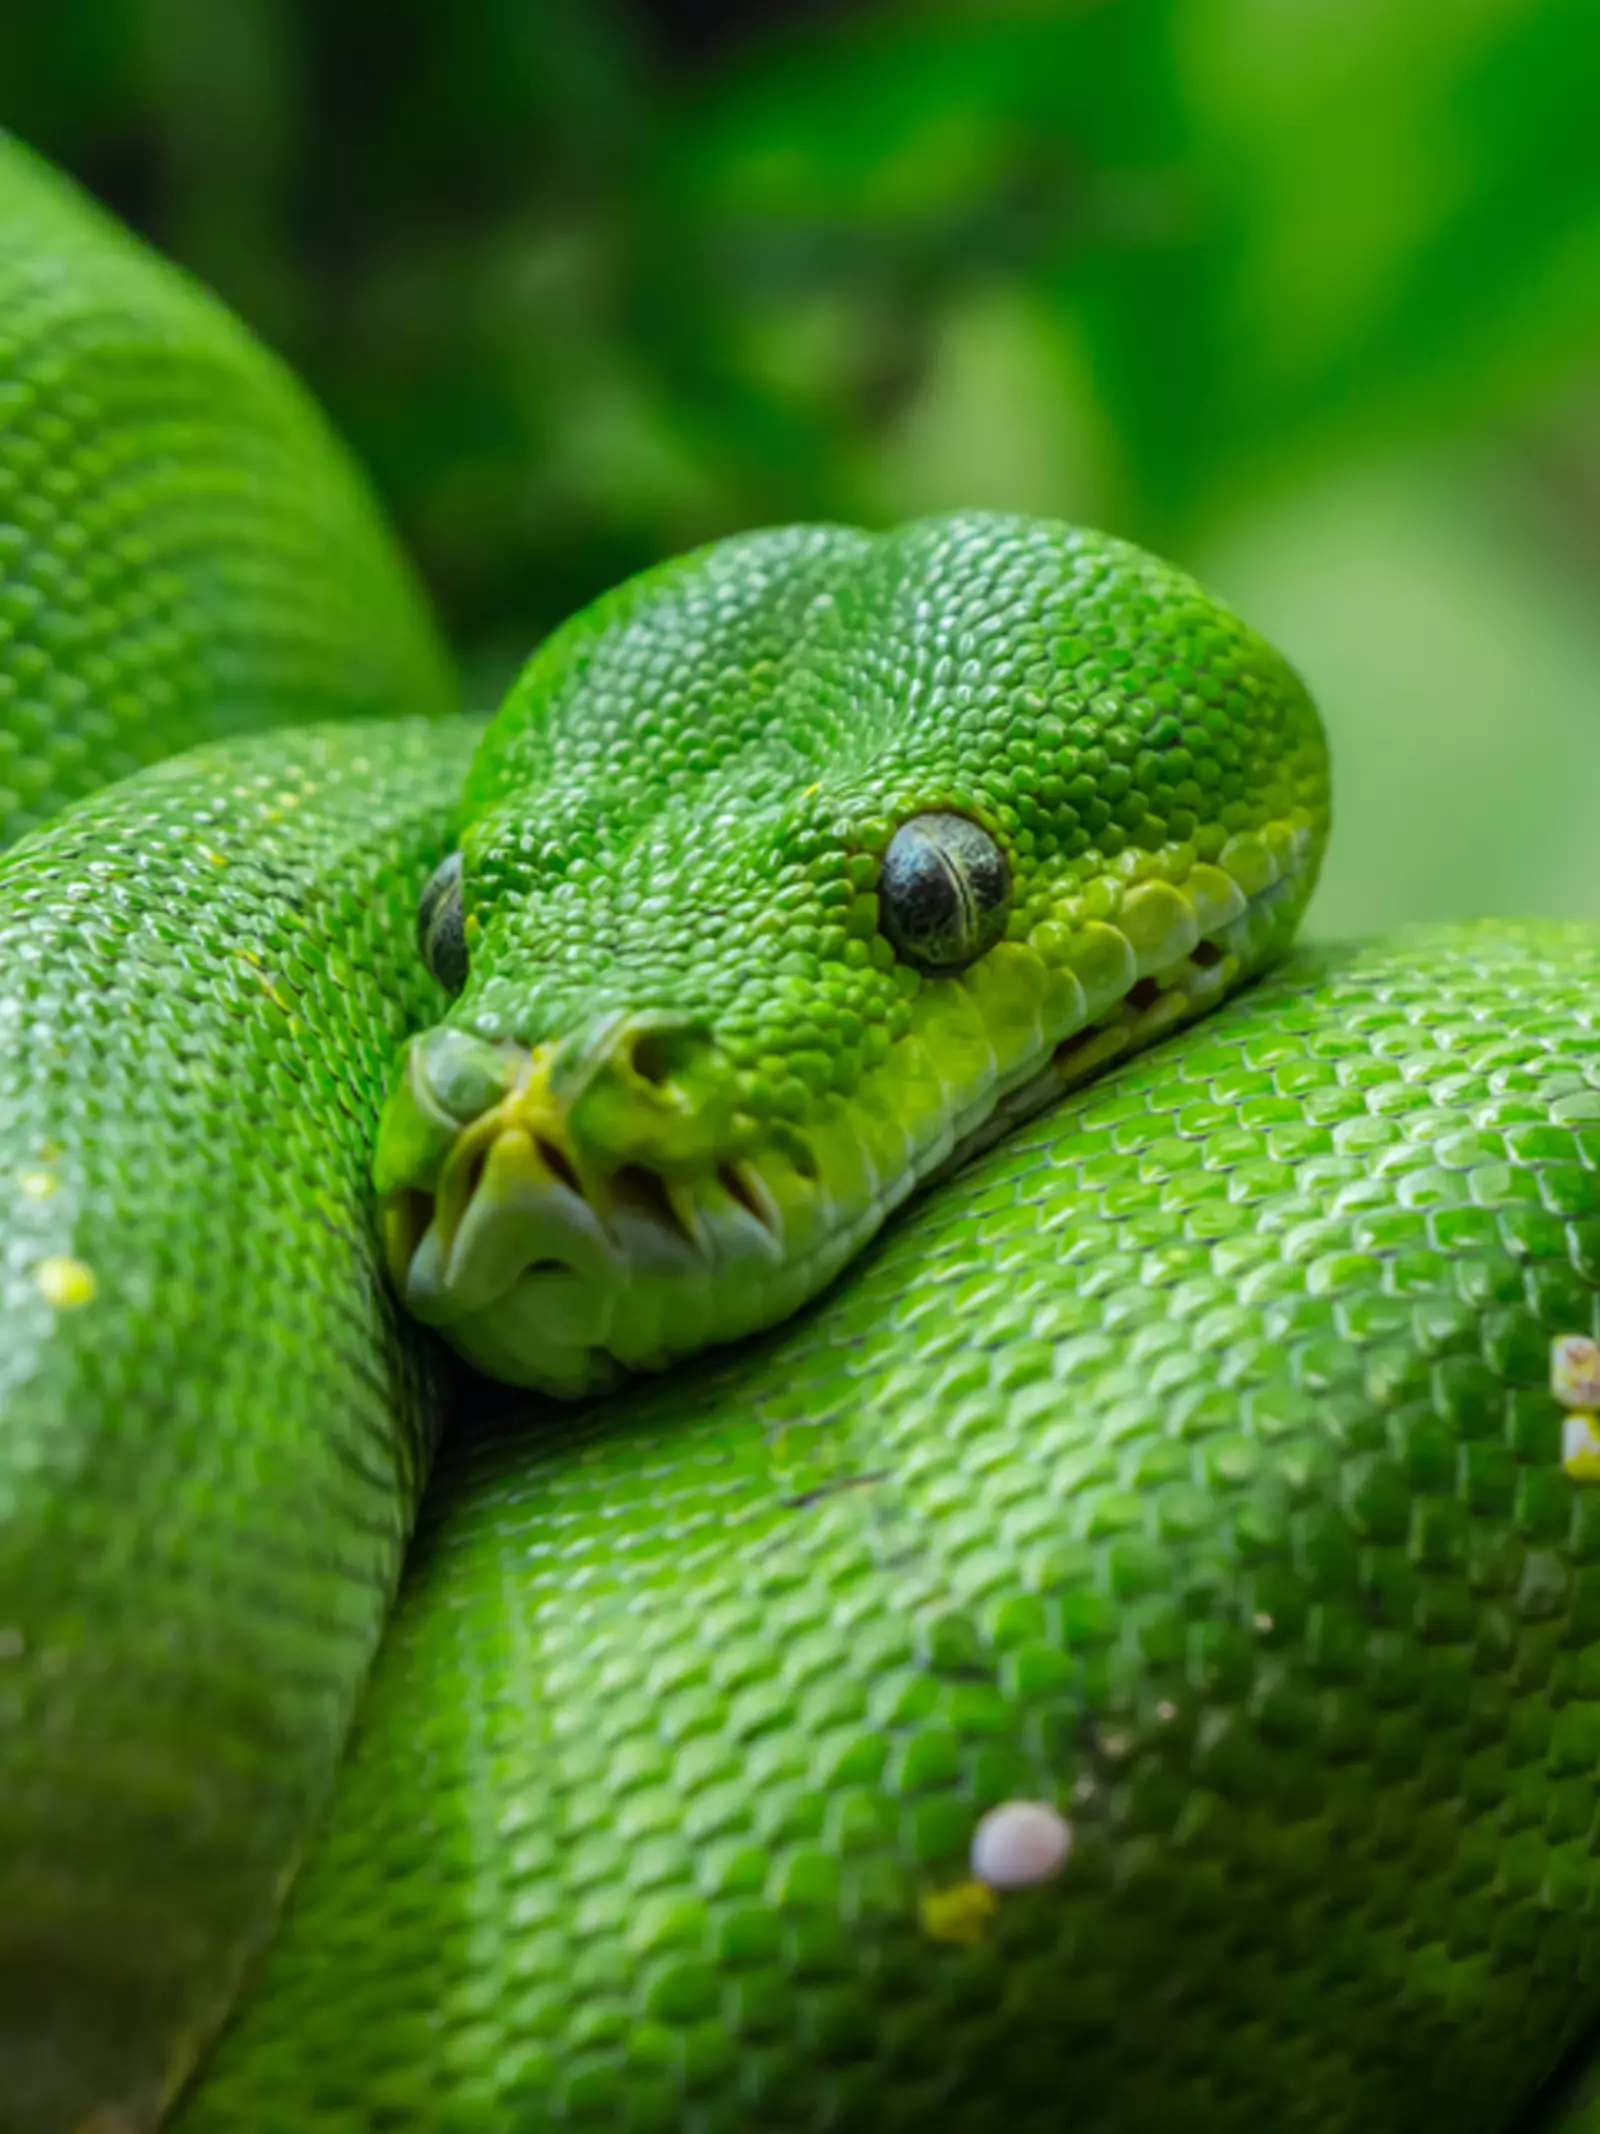 Green tree python which features at our reptile house